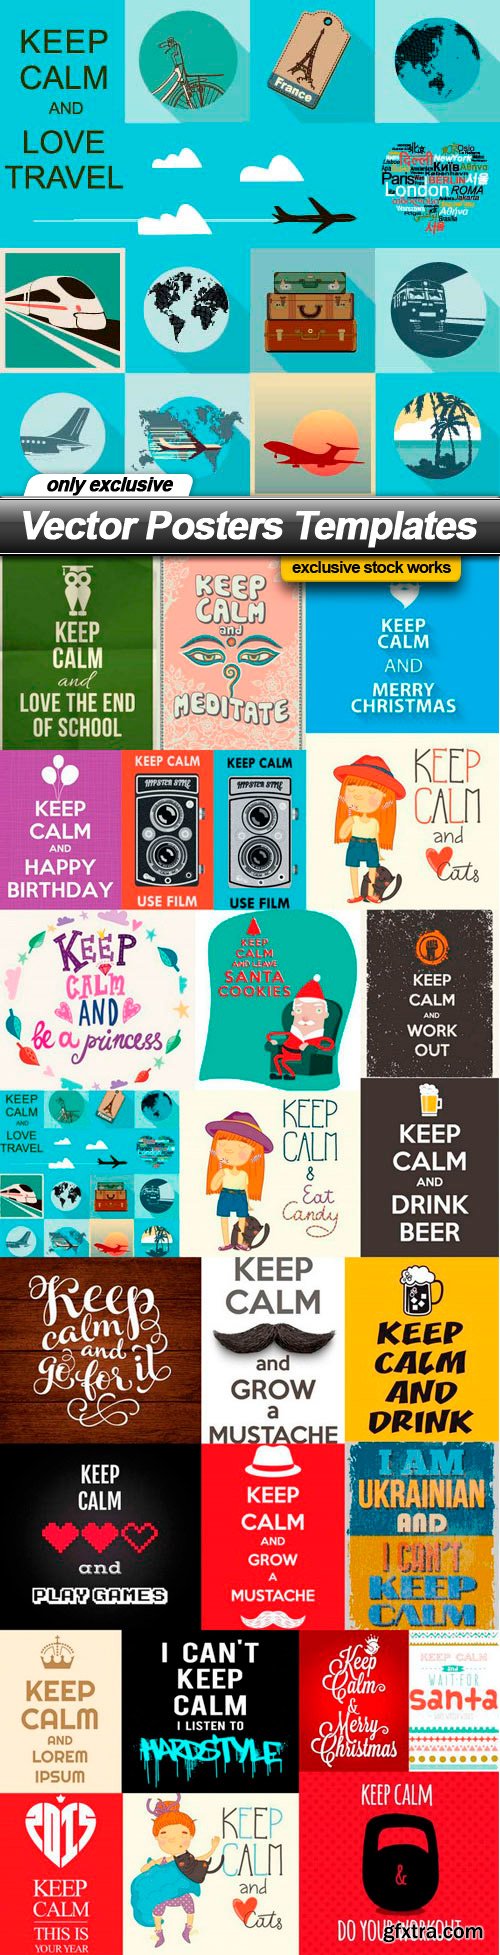 Vector Posters Templates - 25 EPS